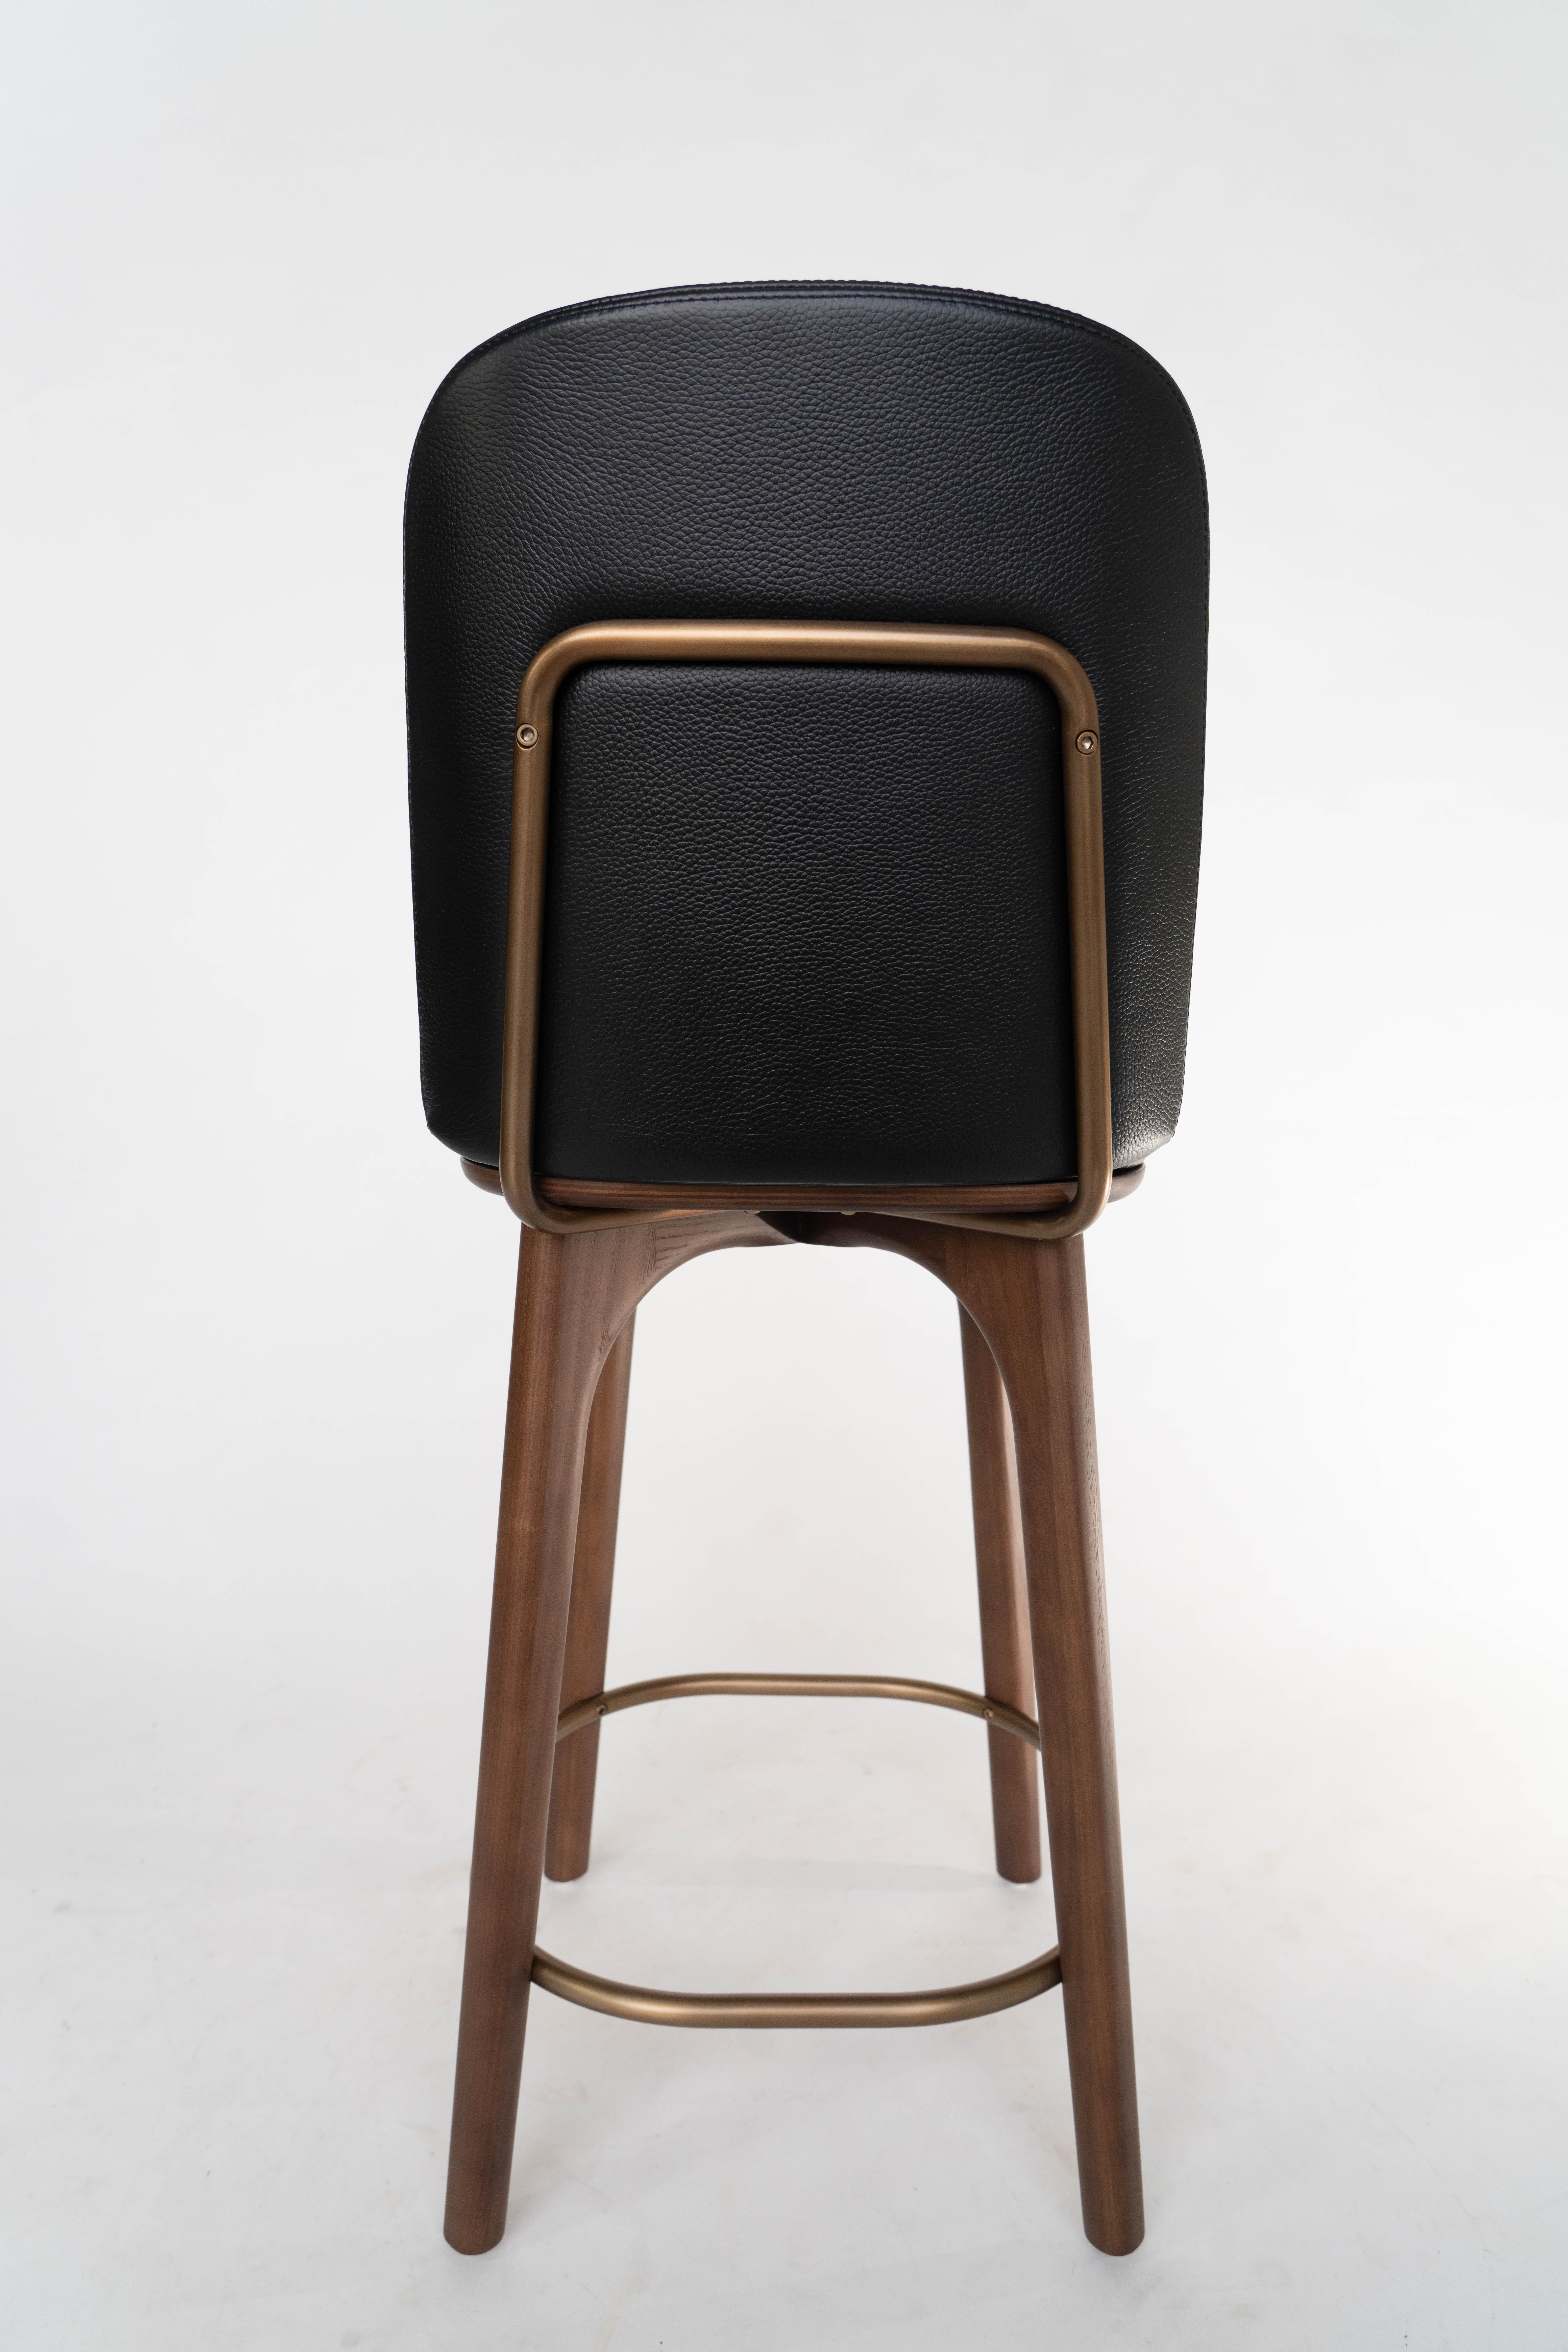 Industrial Stellar Works Utility Counter Chair Walnut stained Ash, Caress Black Leather For Sale